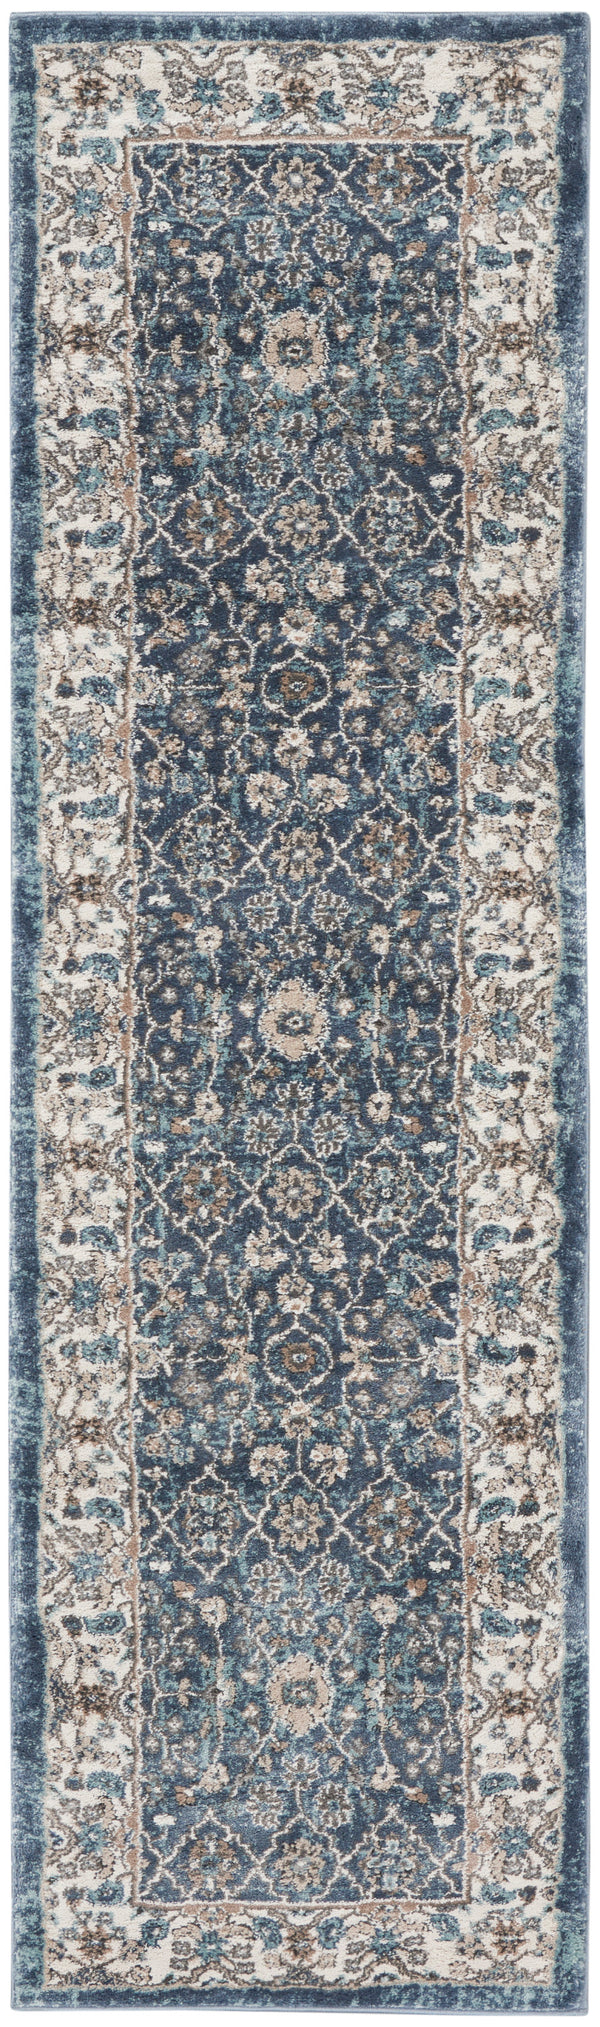 Kathy Ireland American Manor AMR01 Blue/Ivory French Country Indoor Rug